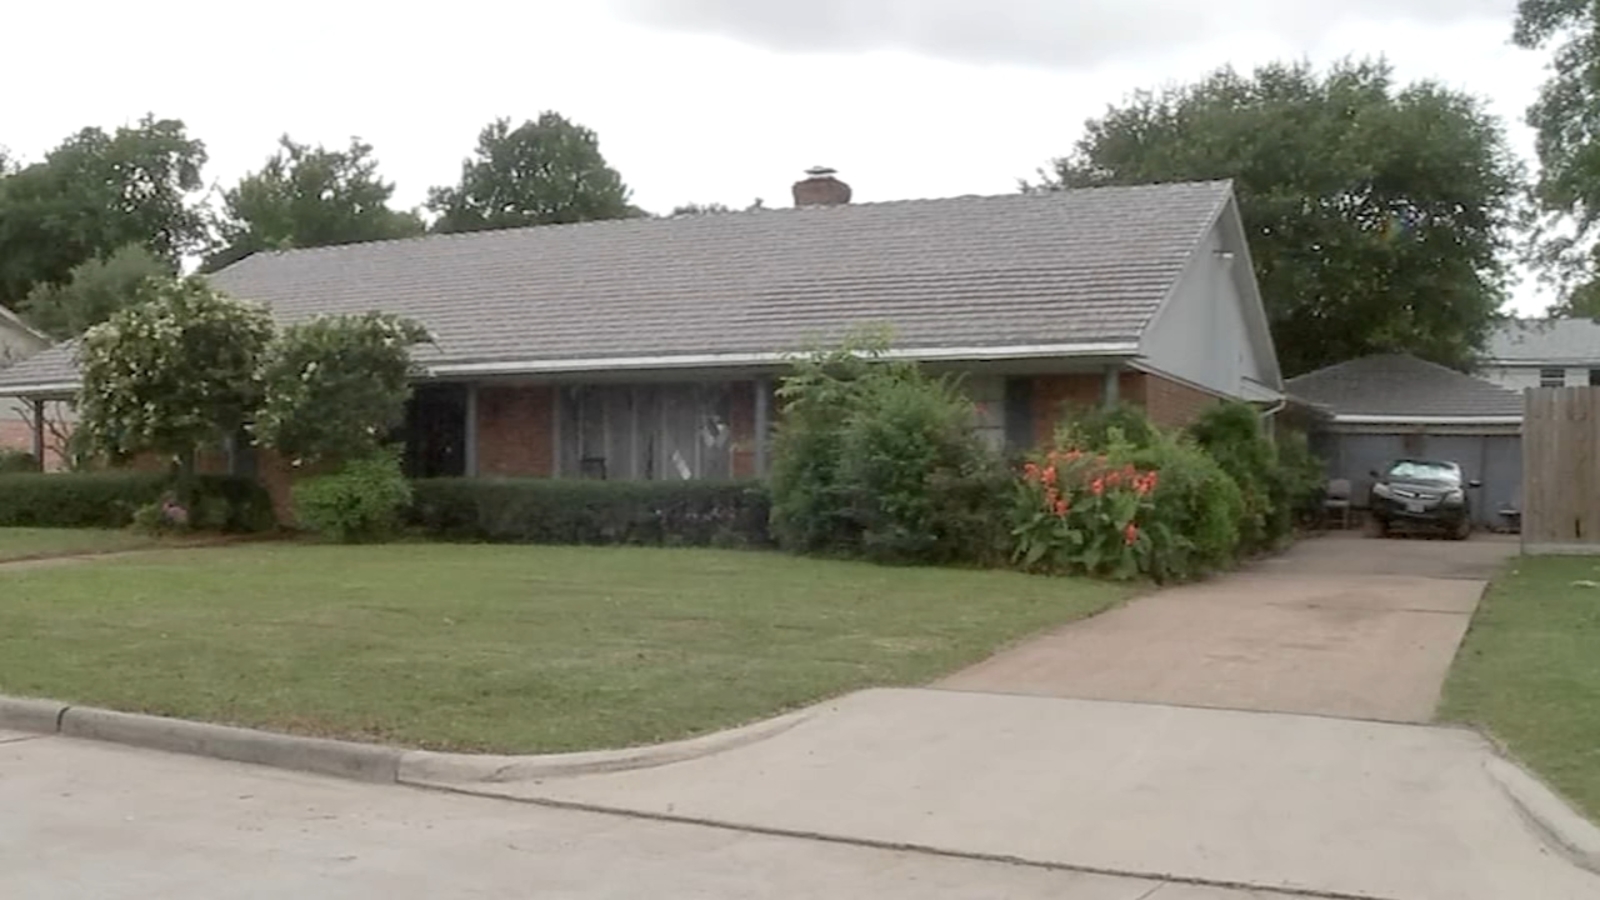 Empty Houston home: Precinct 2 constable waiting on US Housing and Urban Development to act on ‘nuisance home’ in Colgate Street [Video]